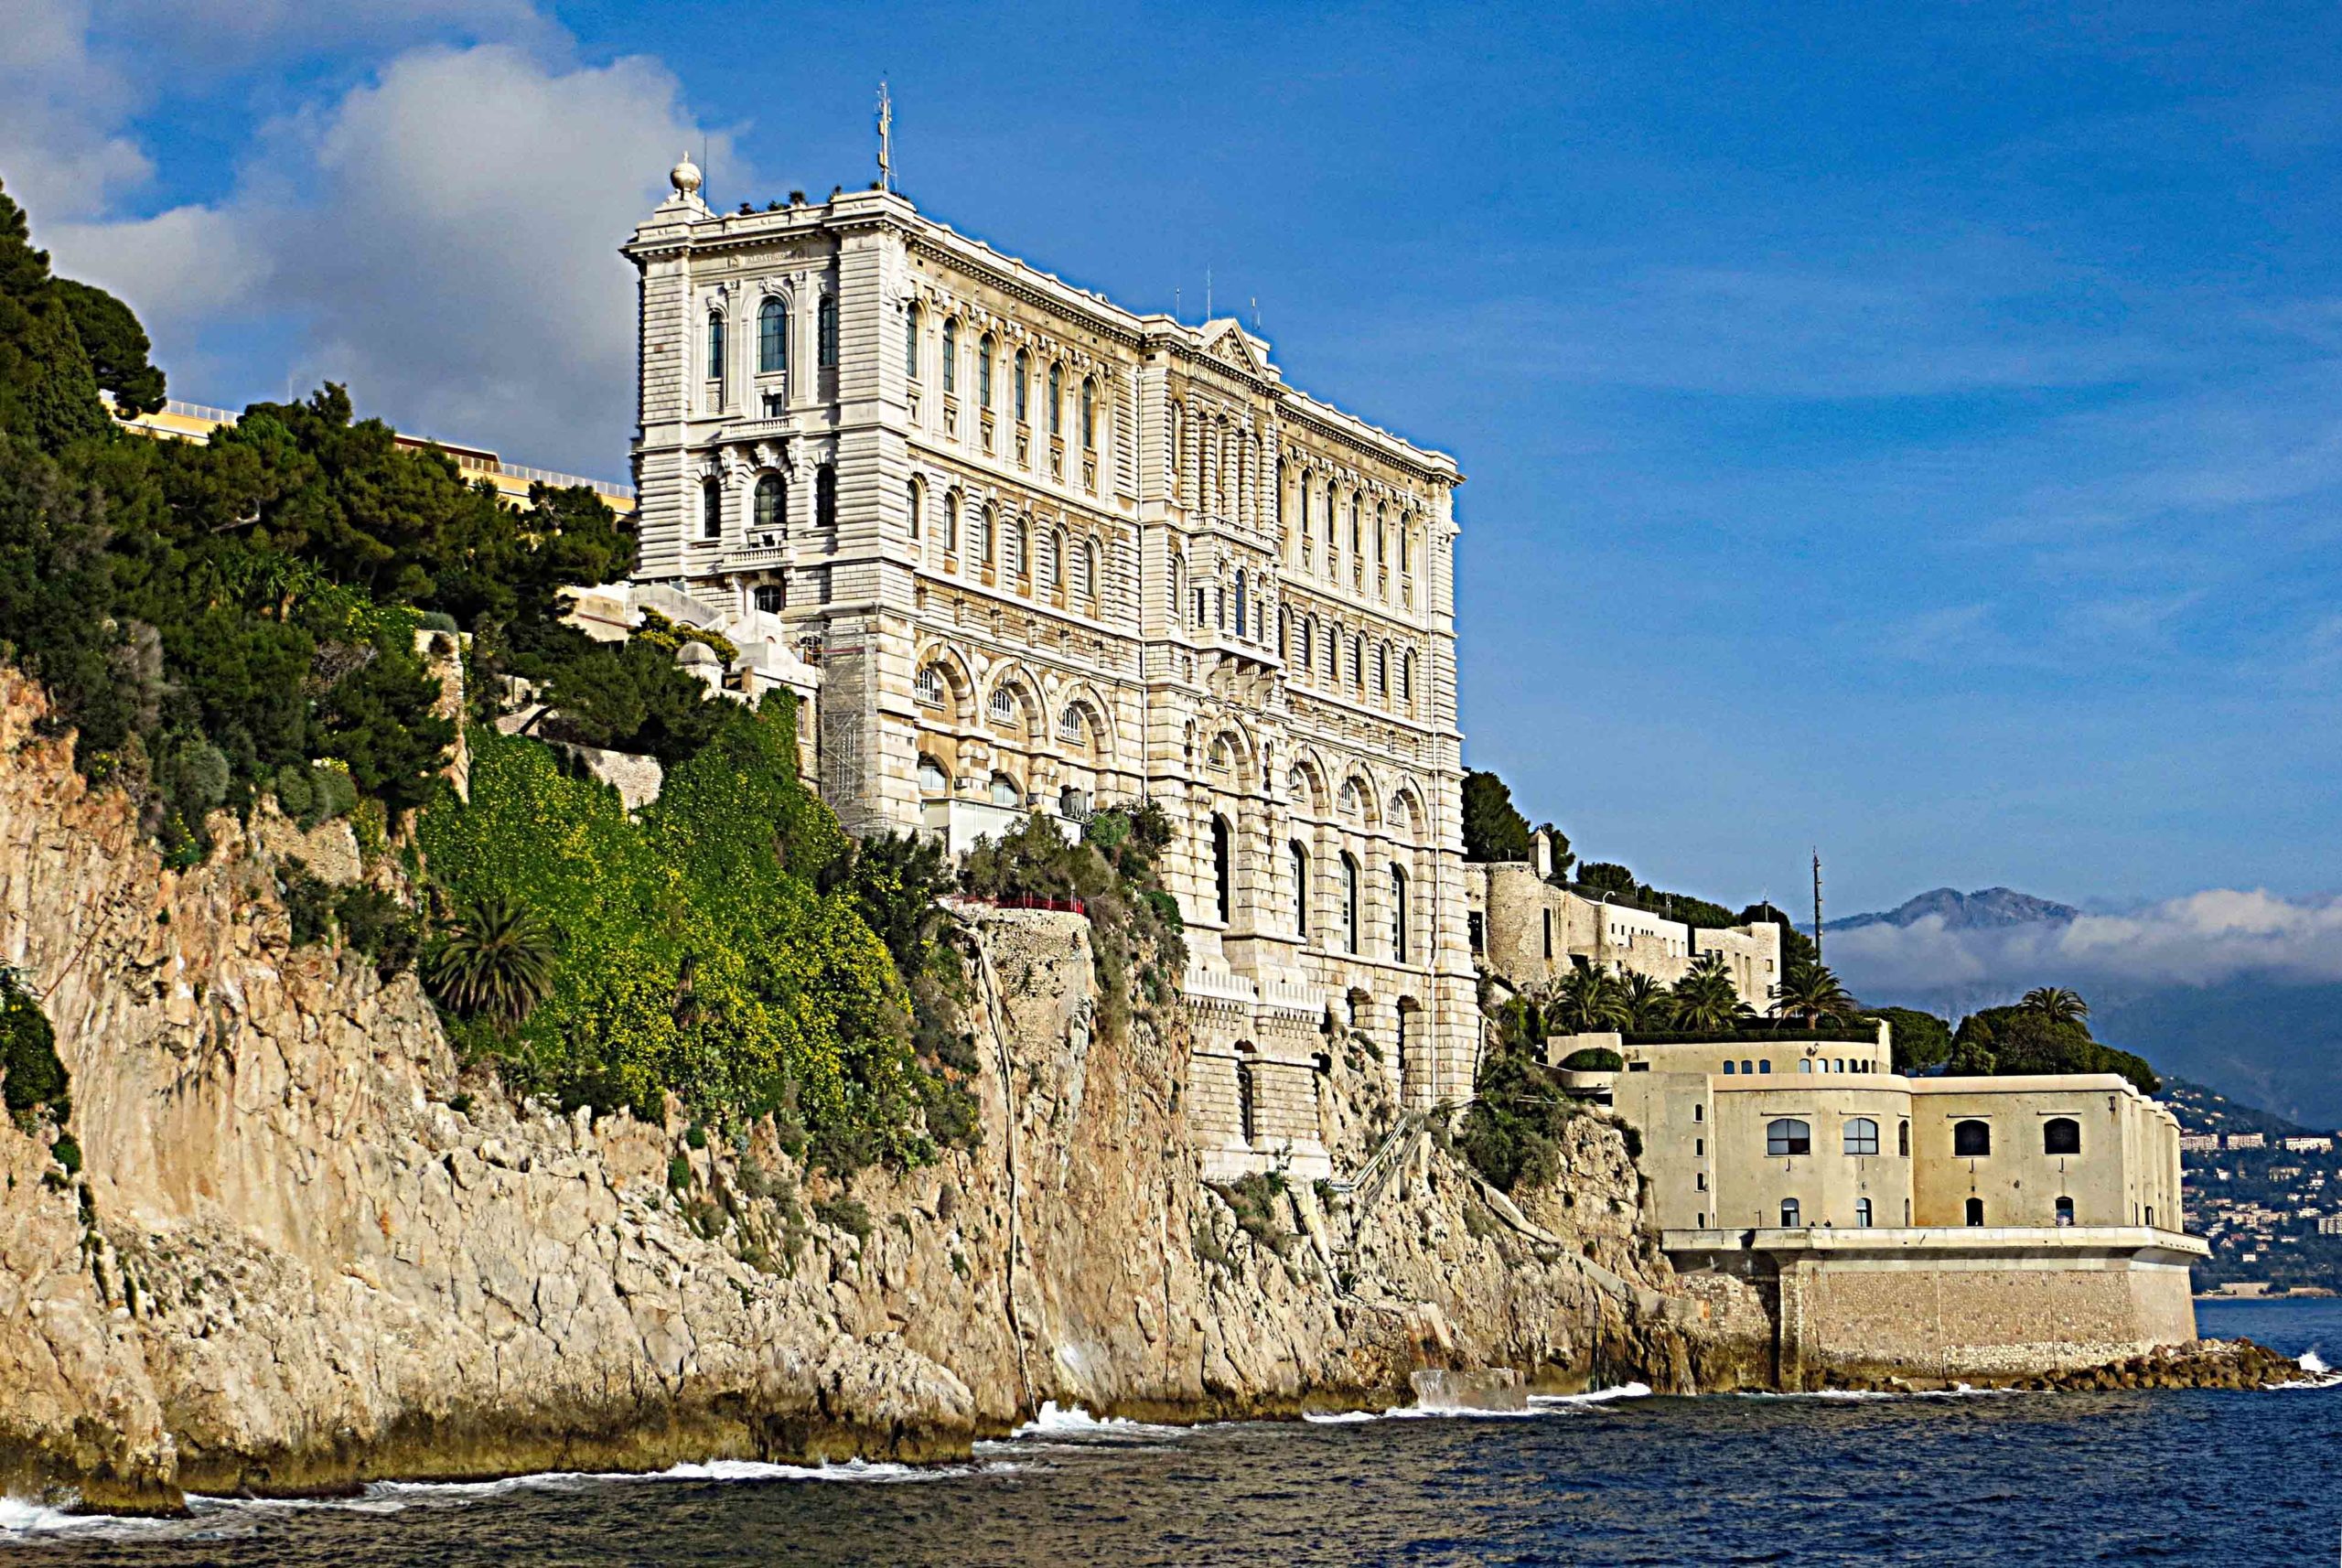 Monaco Oceanographic Museum © Mister No - licence [CC BY 3.0] from Wikimedia Commons